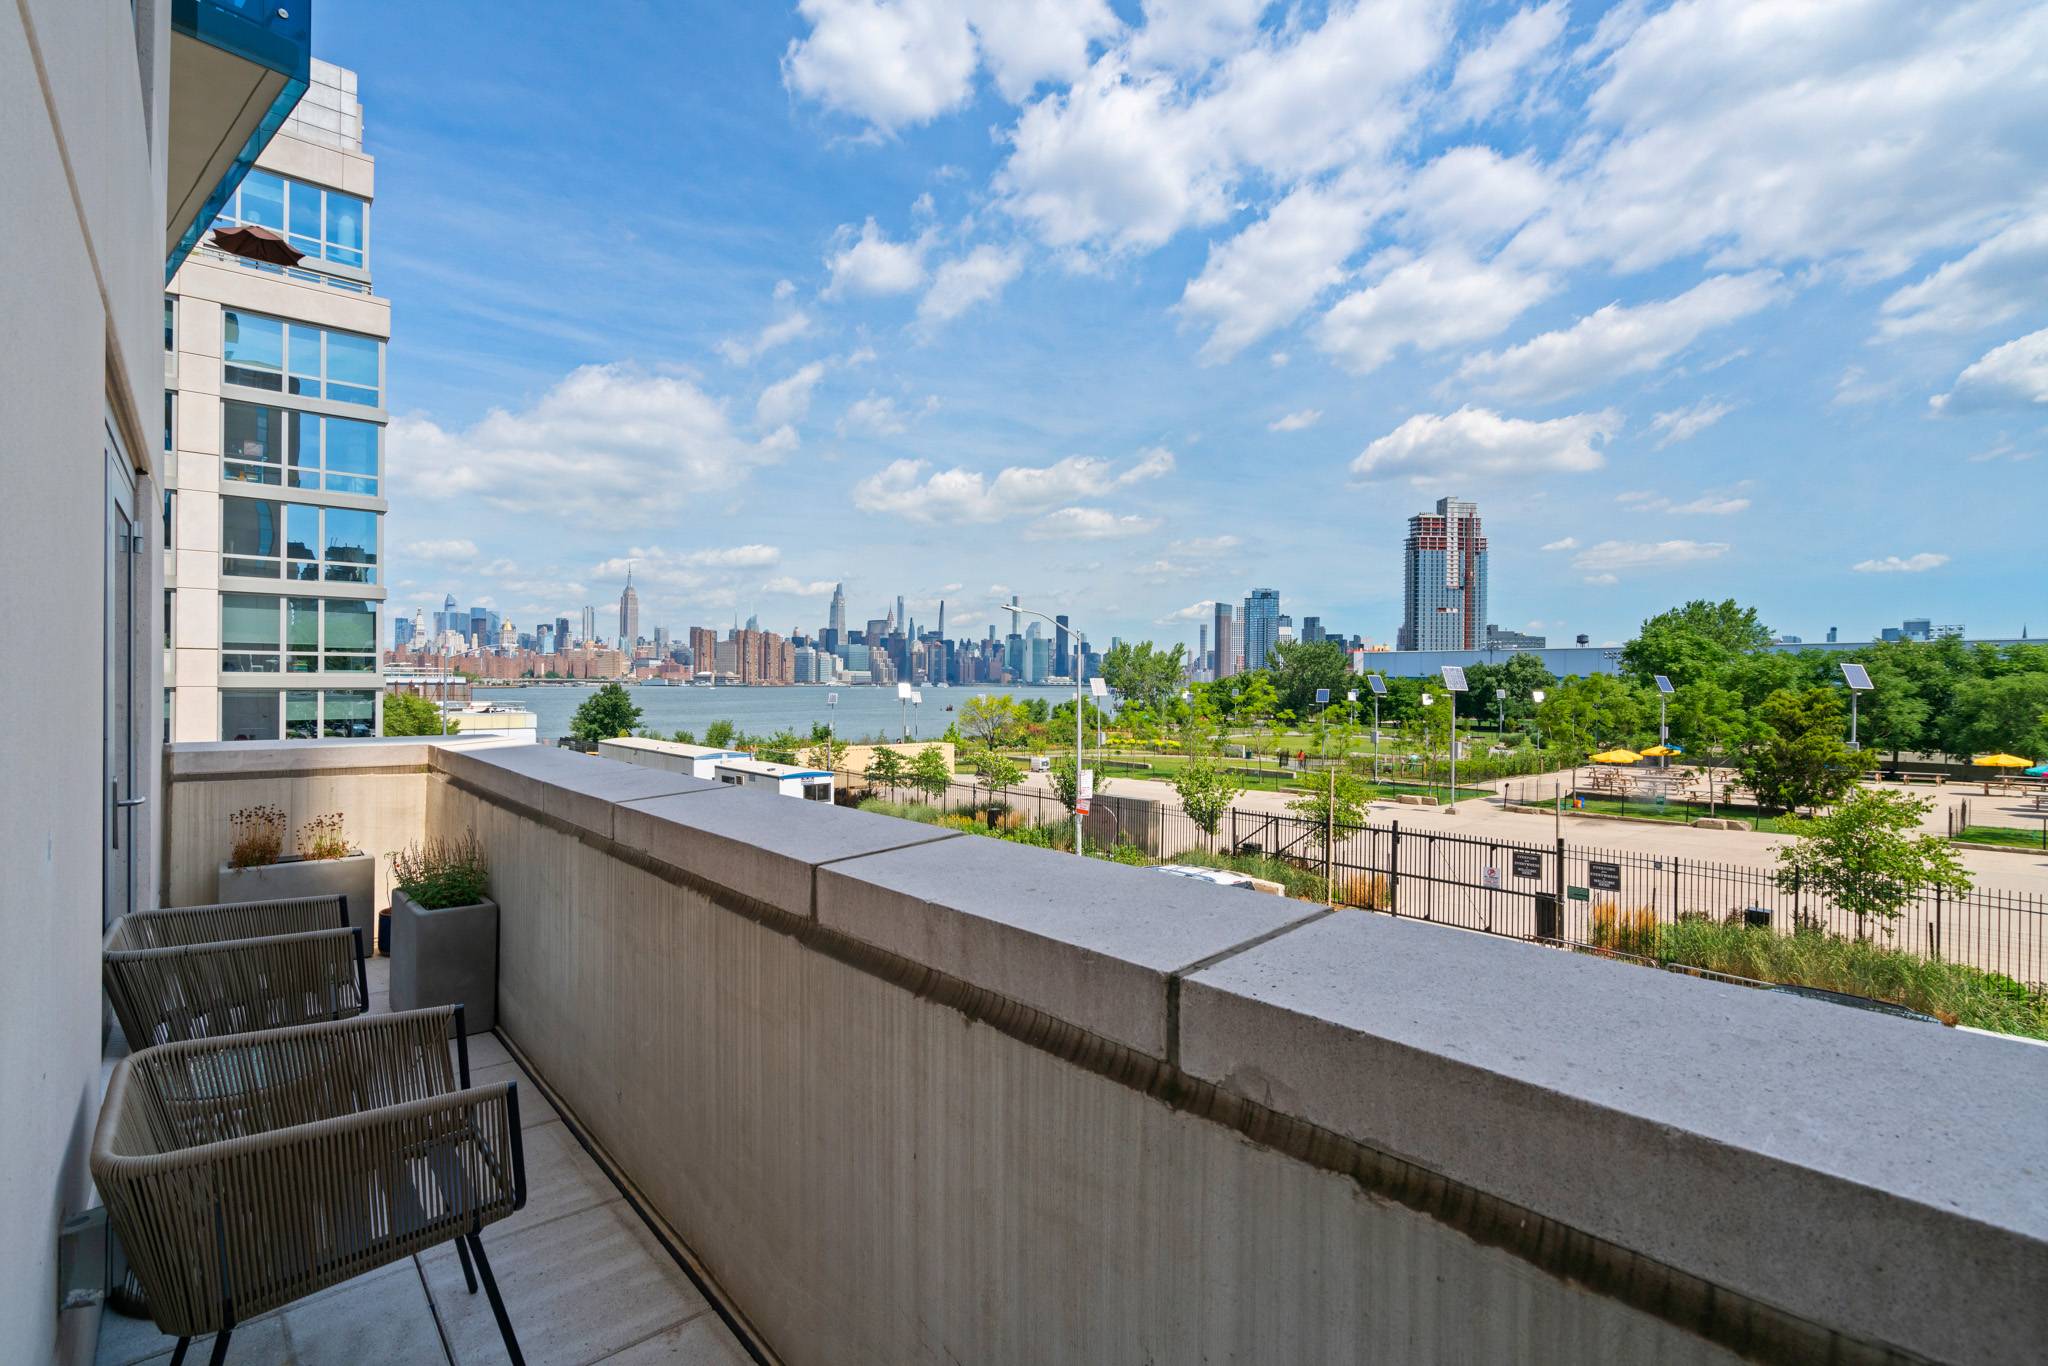 WATERFRONT ONE BED W/ PRIVATE OUTDOOR TERRACE AT THE EDGE WILLIAMSBURG - NYC & EAST RIVER VIEWS!